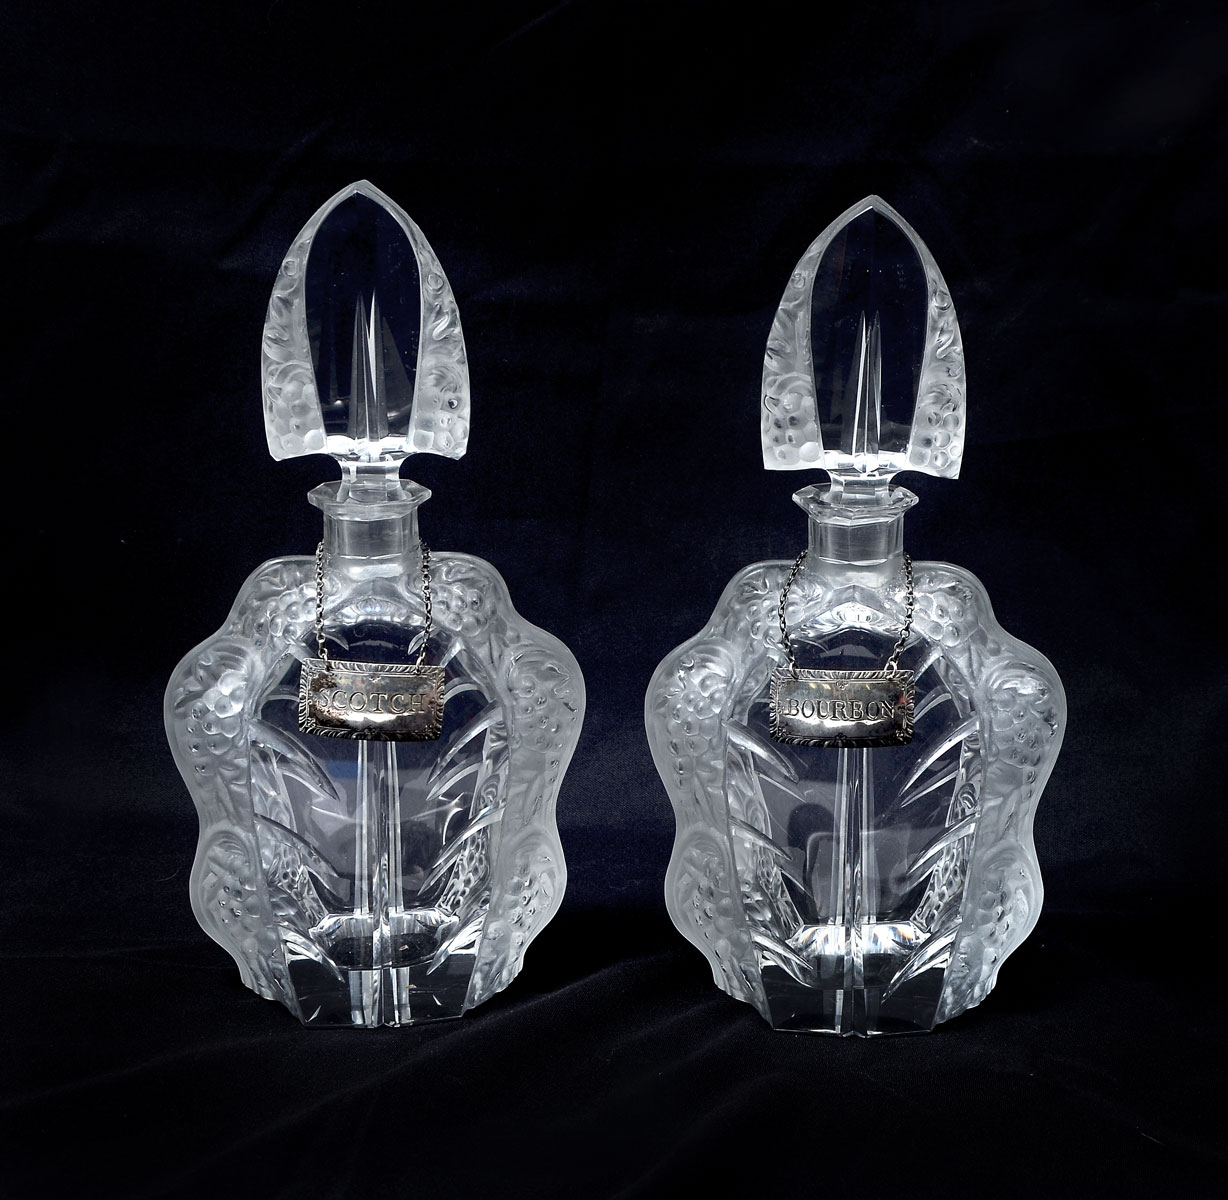 PR OF LALIQUE STYLE DECANTERS: